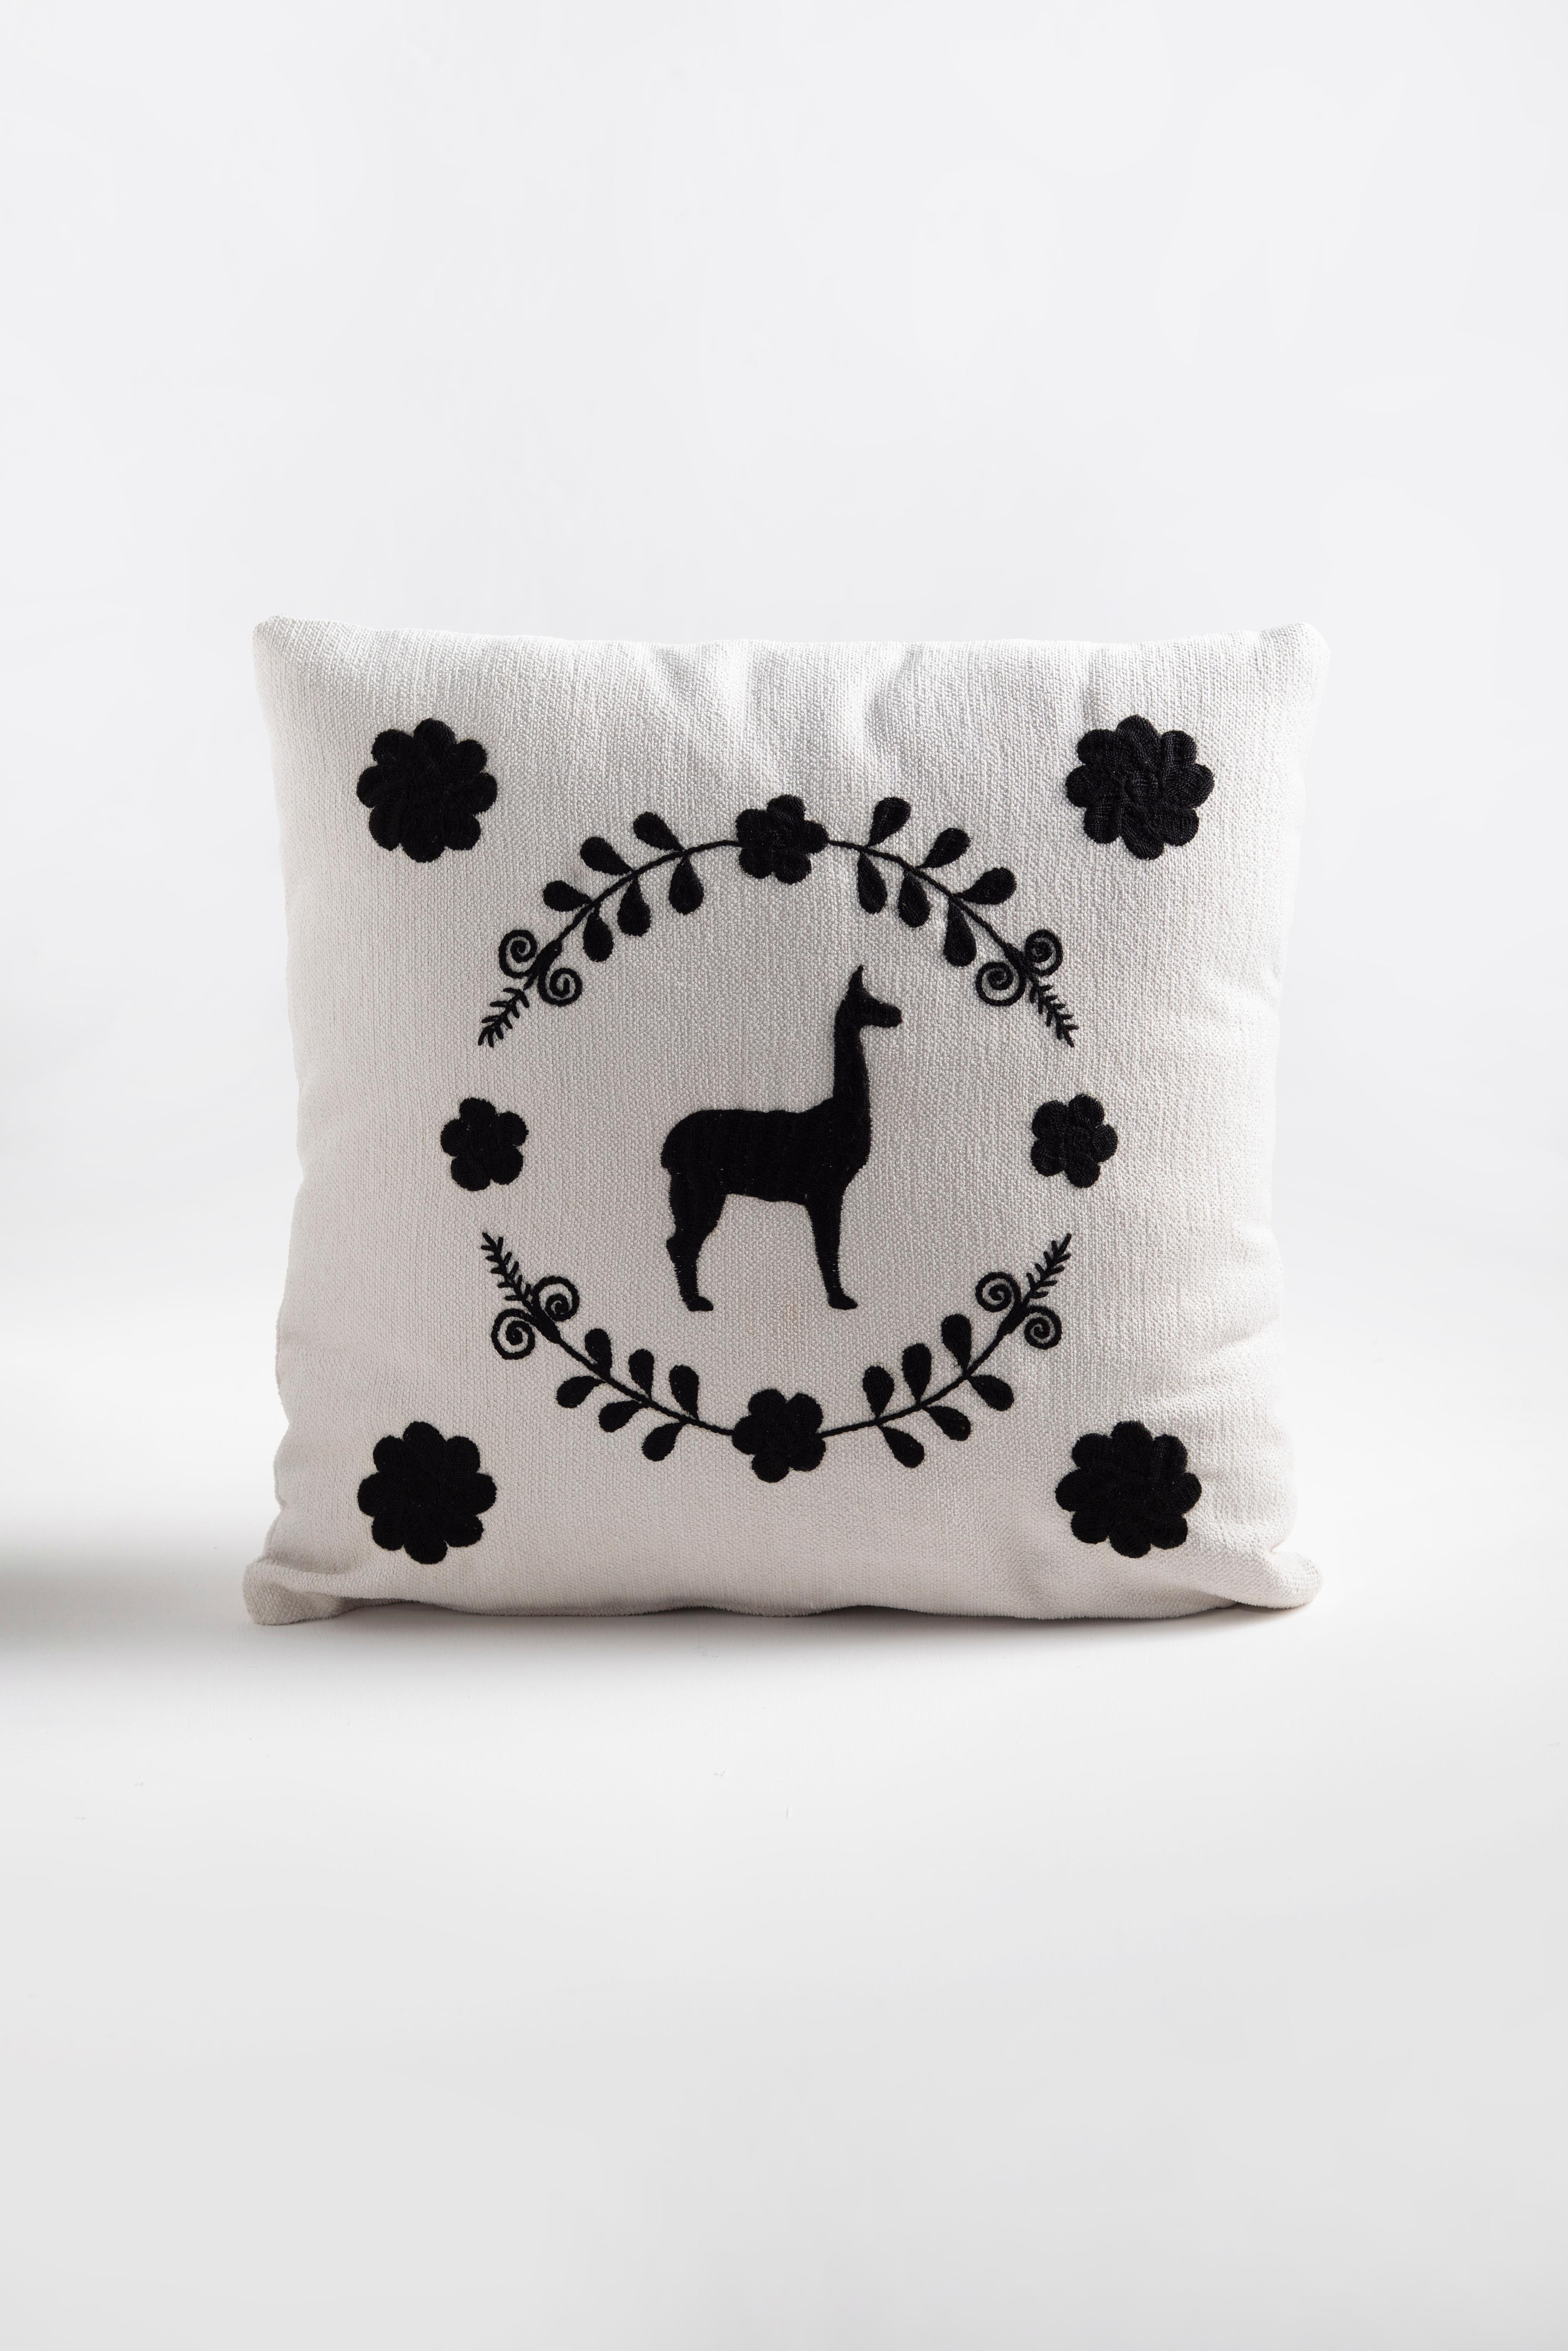 Decorative pillows with hand-embroidered llama motif from Zuleta, Imbabura, and waterproof velvet or upholstery fabric.

These decorative cushions are carefully hand-crafted with cotton embroidery and enriched with accents of sheep fur and leather.